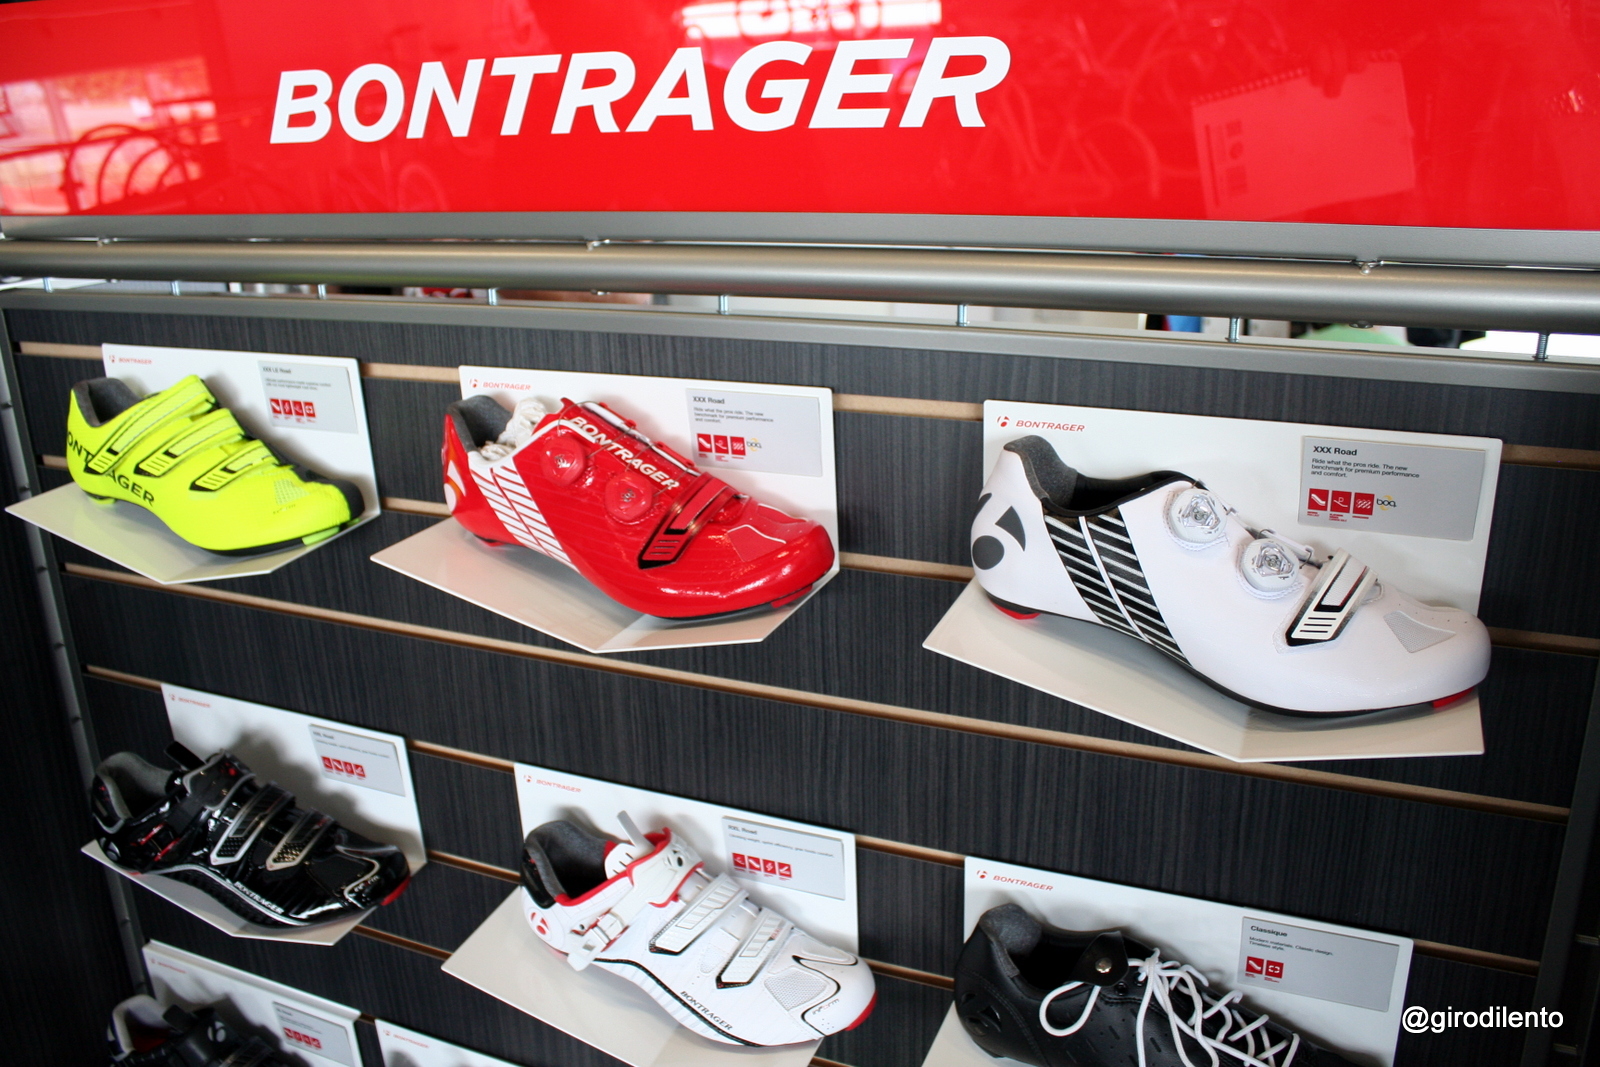 From left to right (top shelf) Bontrager XXX LE Road, Bontrager XXX Road Red, Bontrager XXX Road White